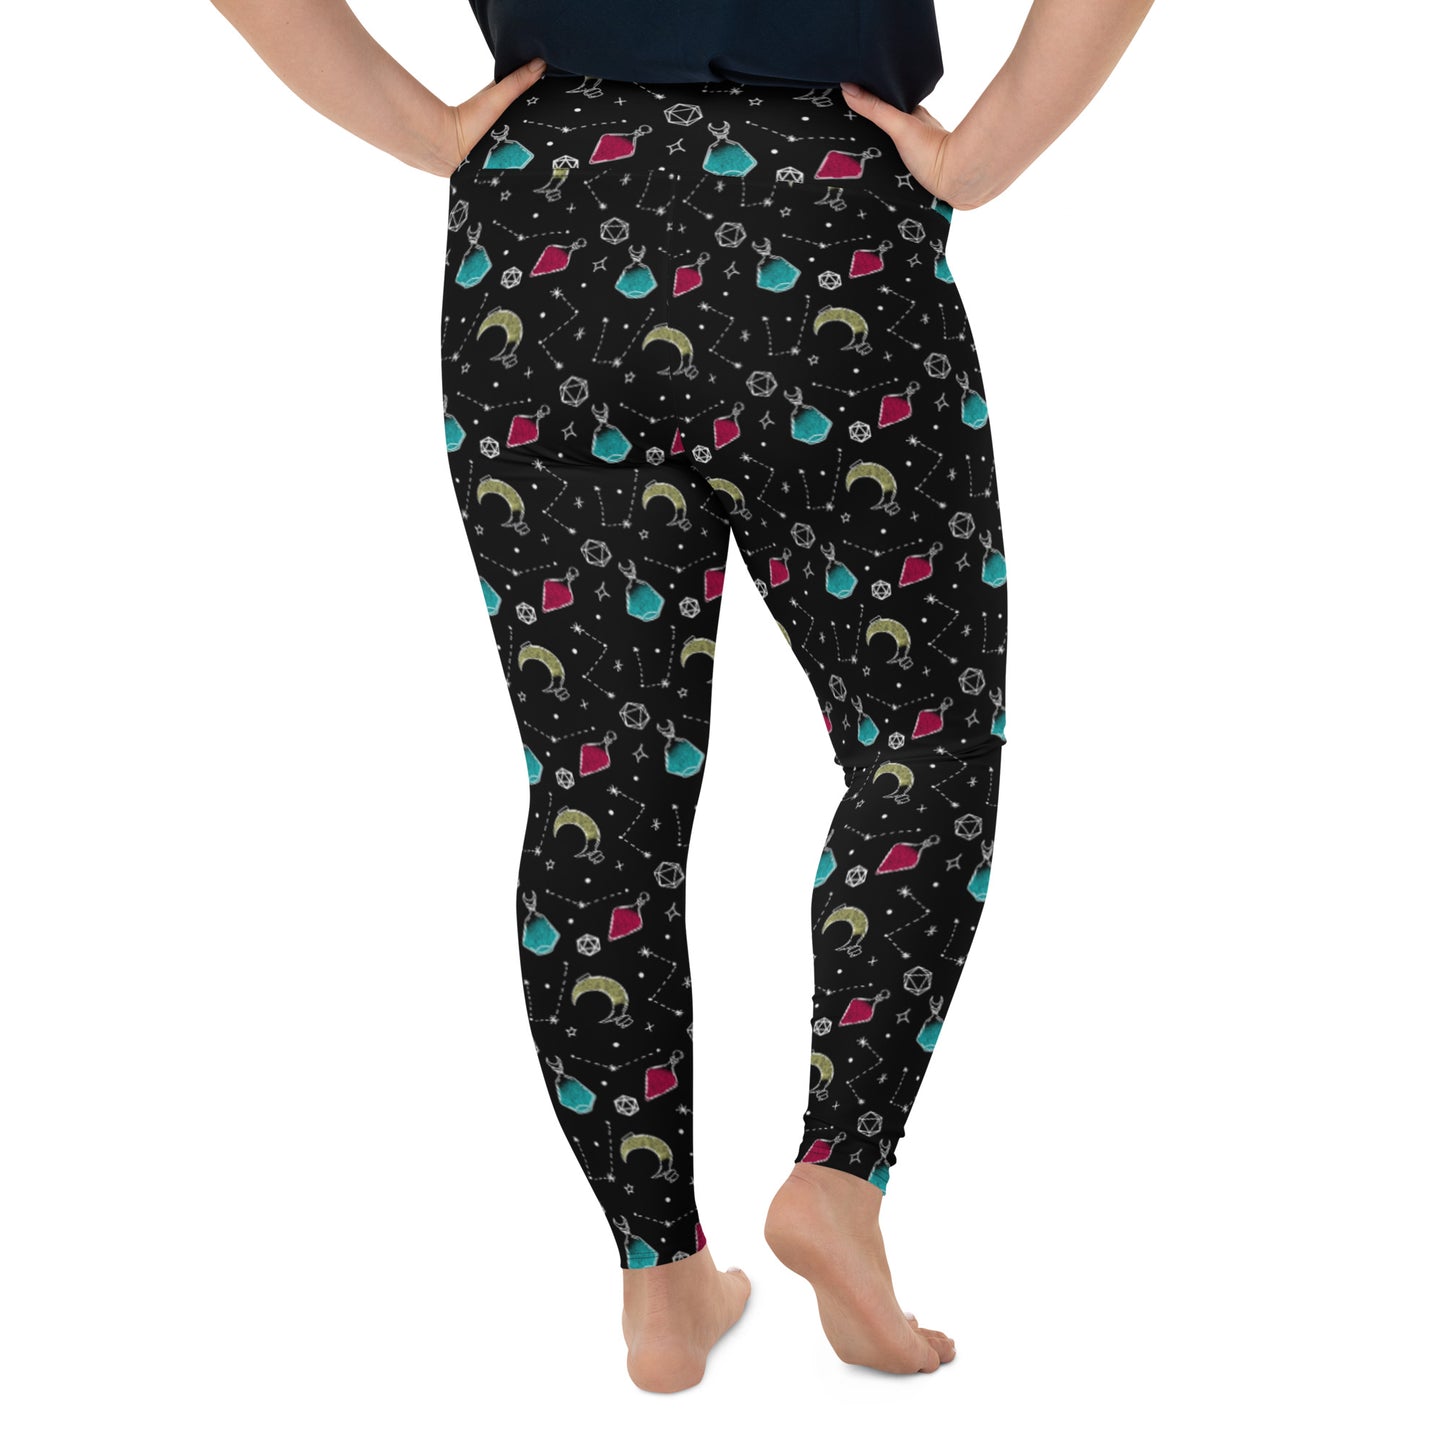 Potions and Dice Plus Size Leggings